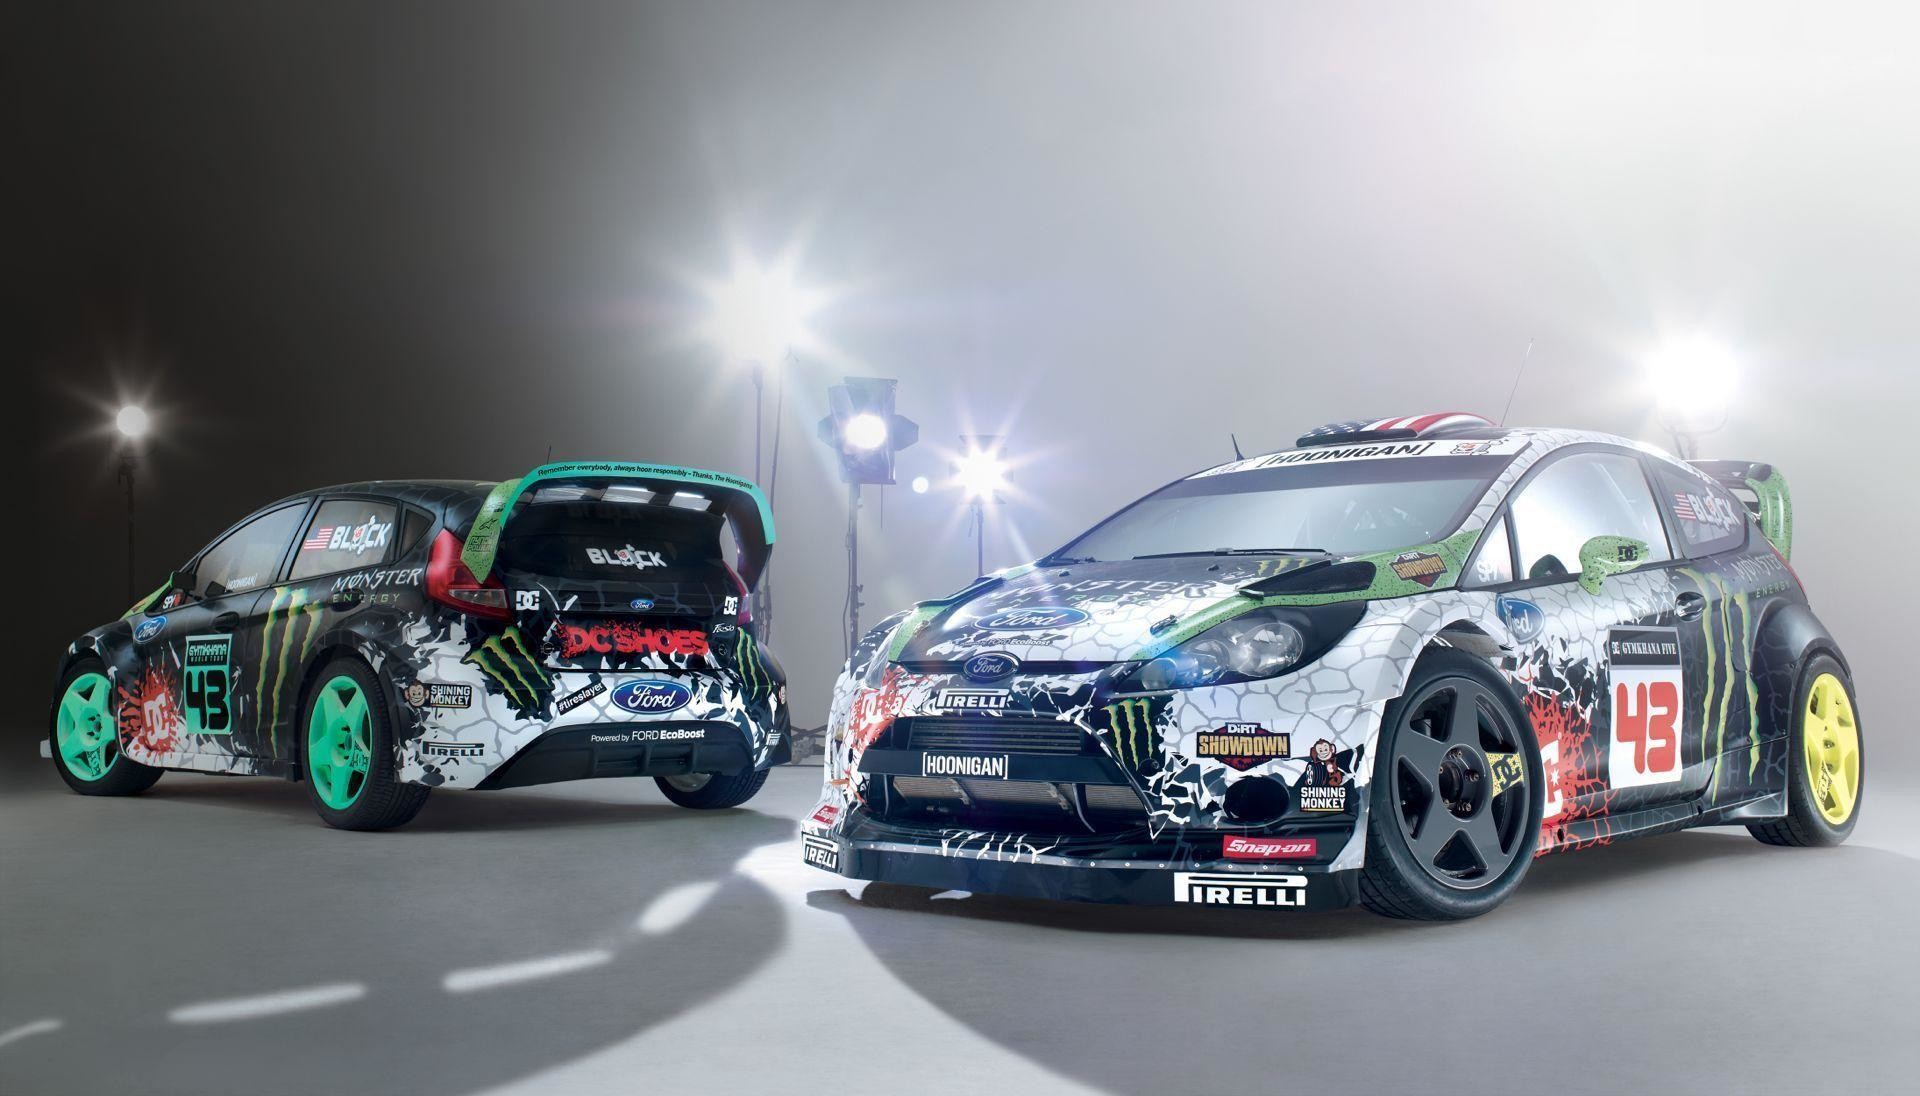 1920x1096 Ken Block Ford Fiesta Wallpaper 13444 HD Pictures | Wallapers Picture